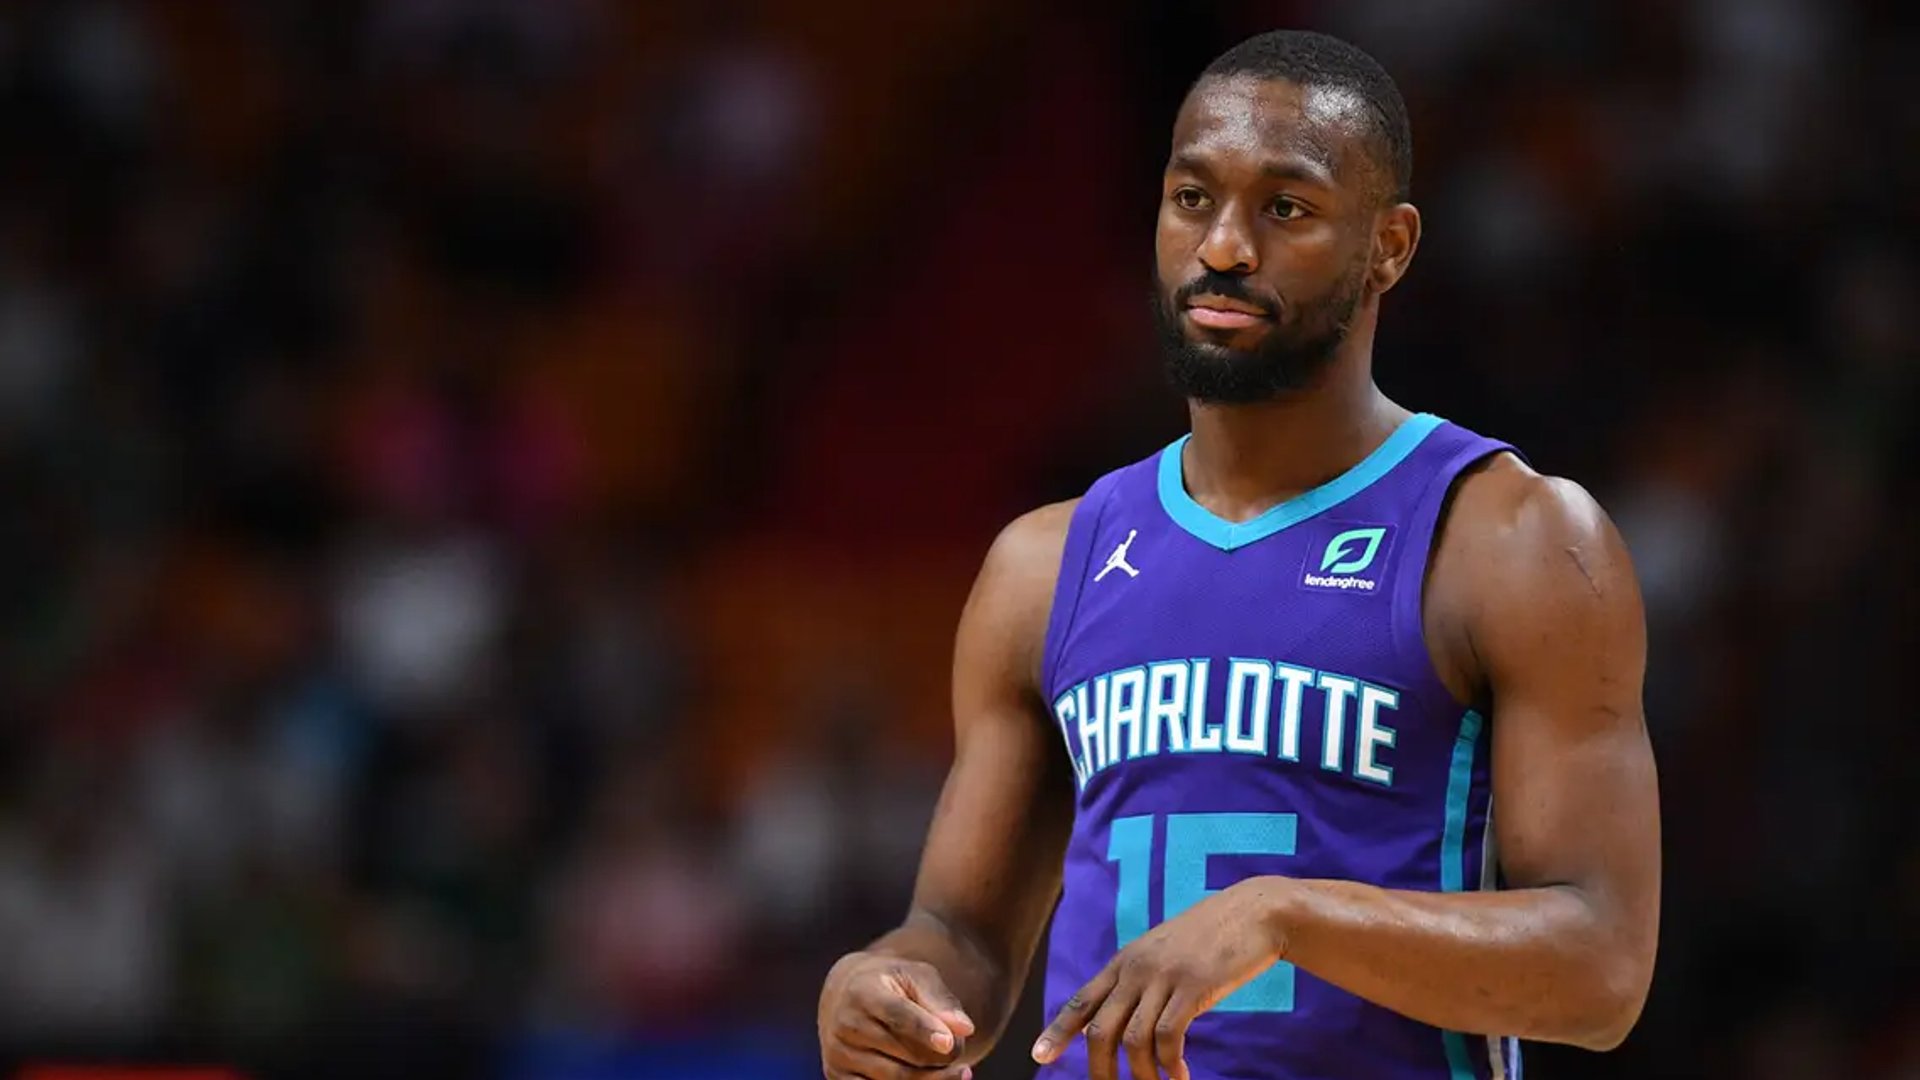 Kemba Walker in a file photo. (Image credits: twitter)